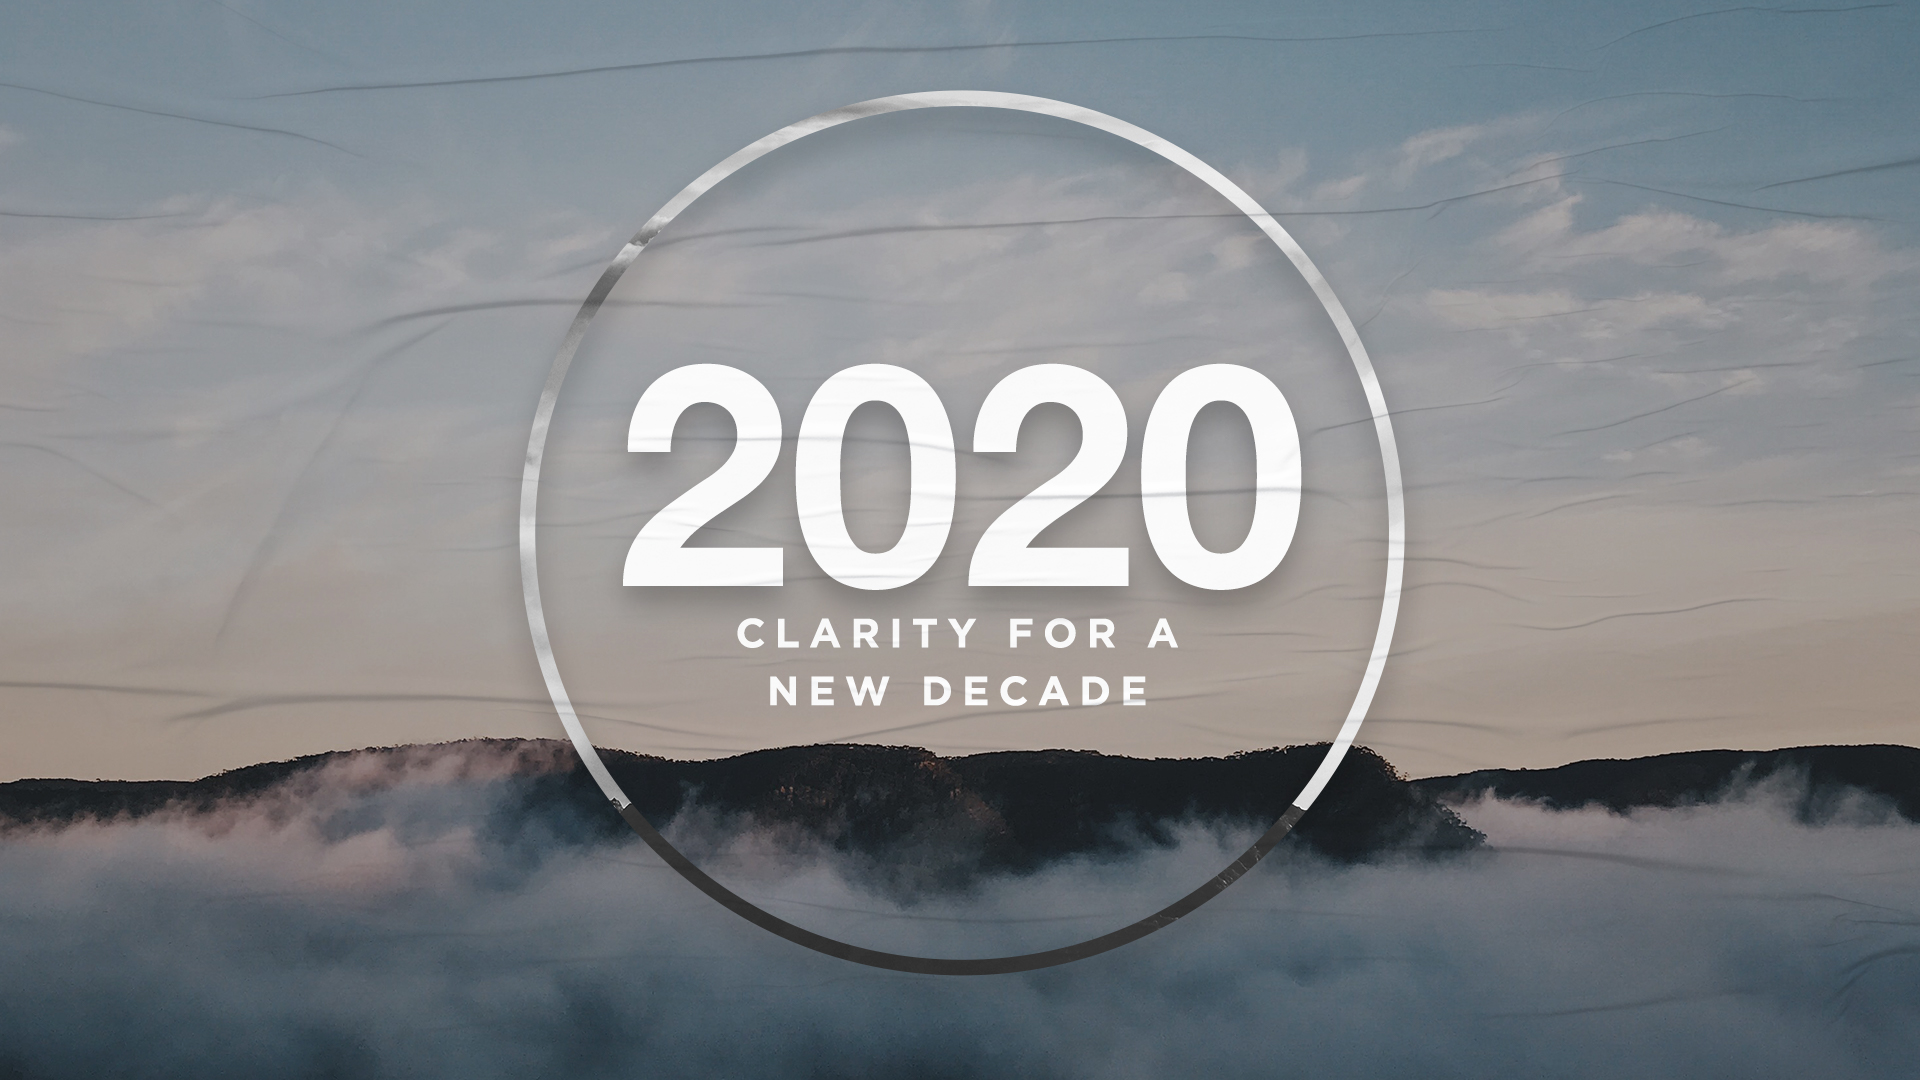    2020 Clarity for a new decade